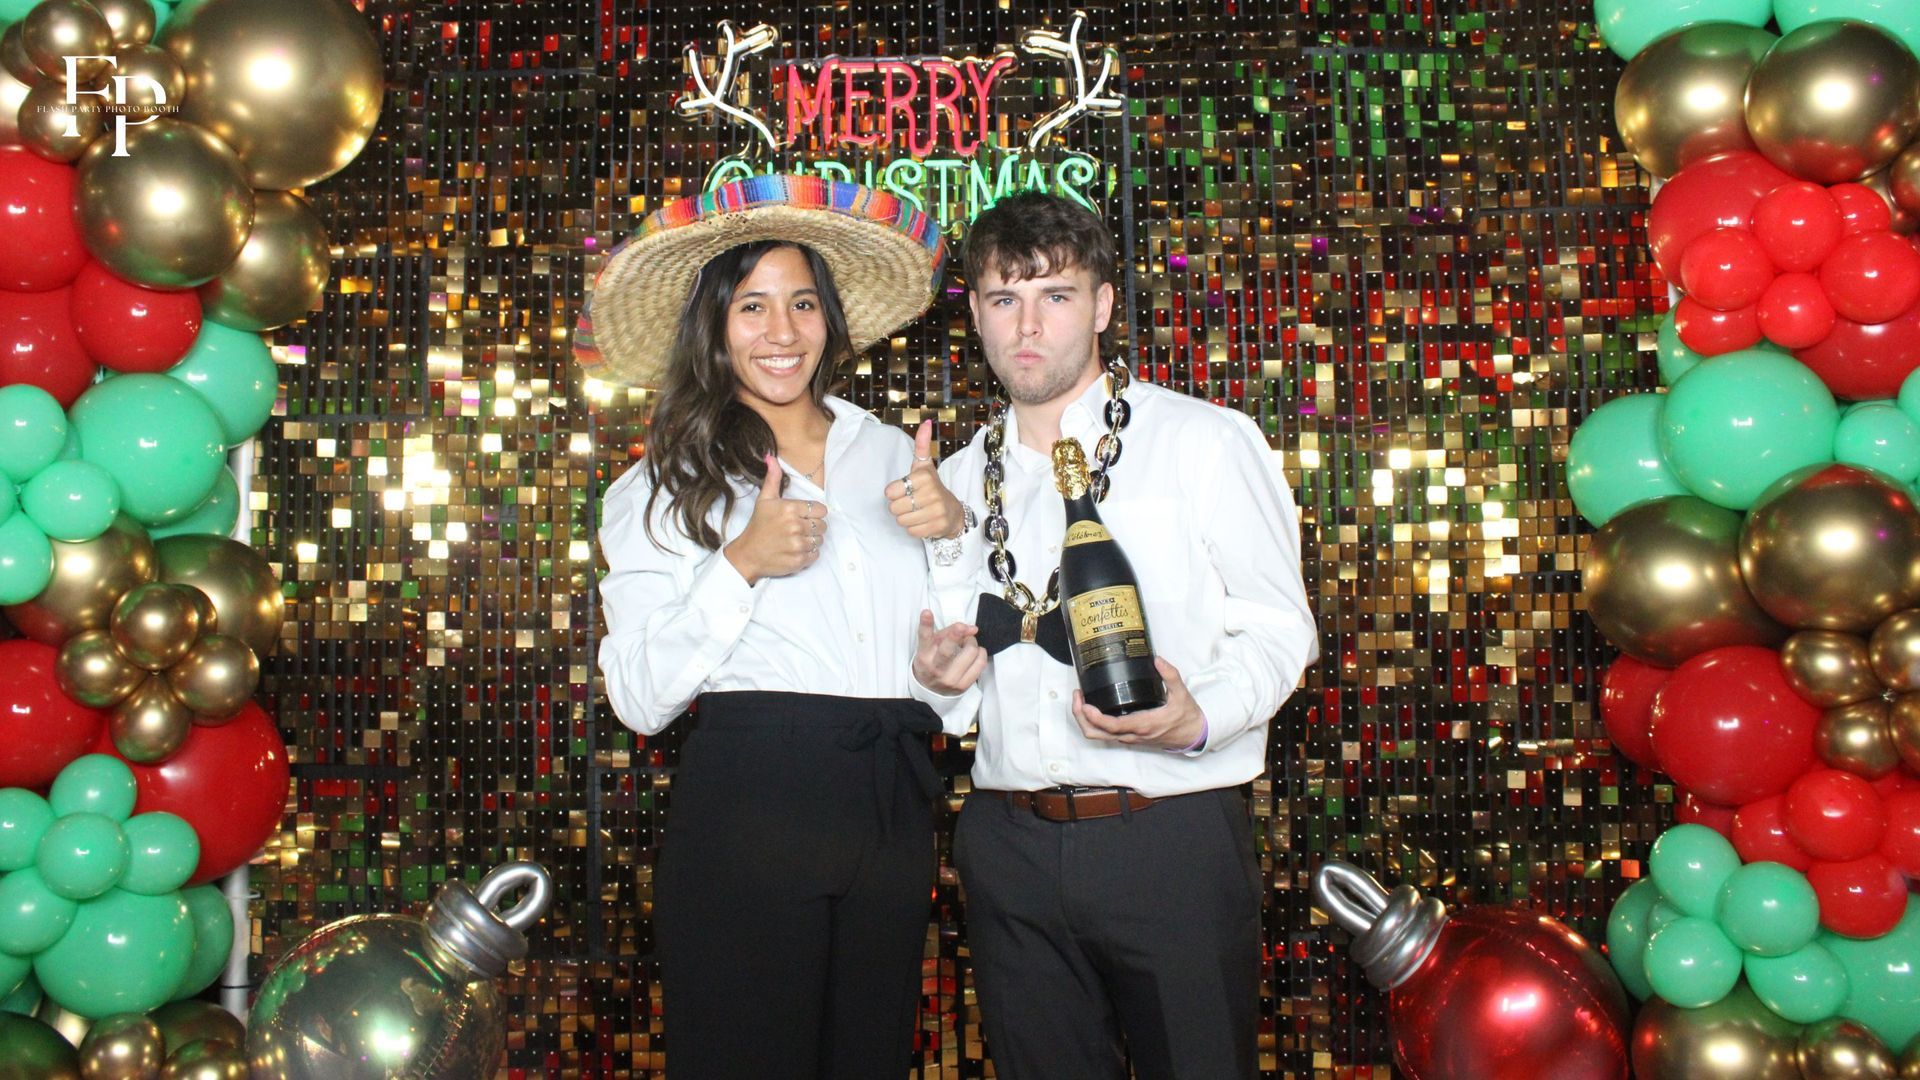 Two persons posing in the Selfie Photo Booth decorated with balloons and festive Christmas decorations.